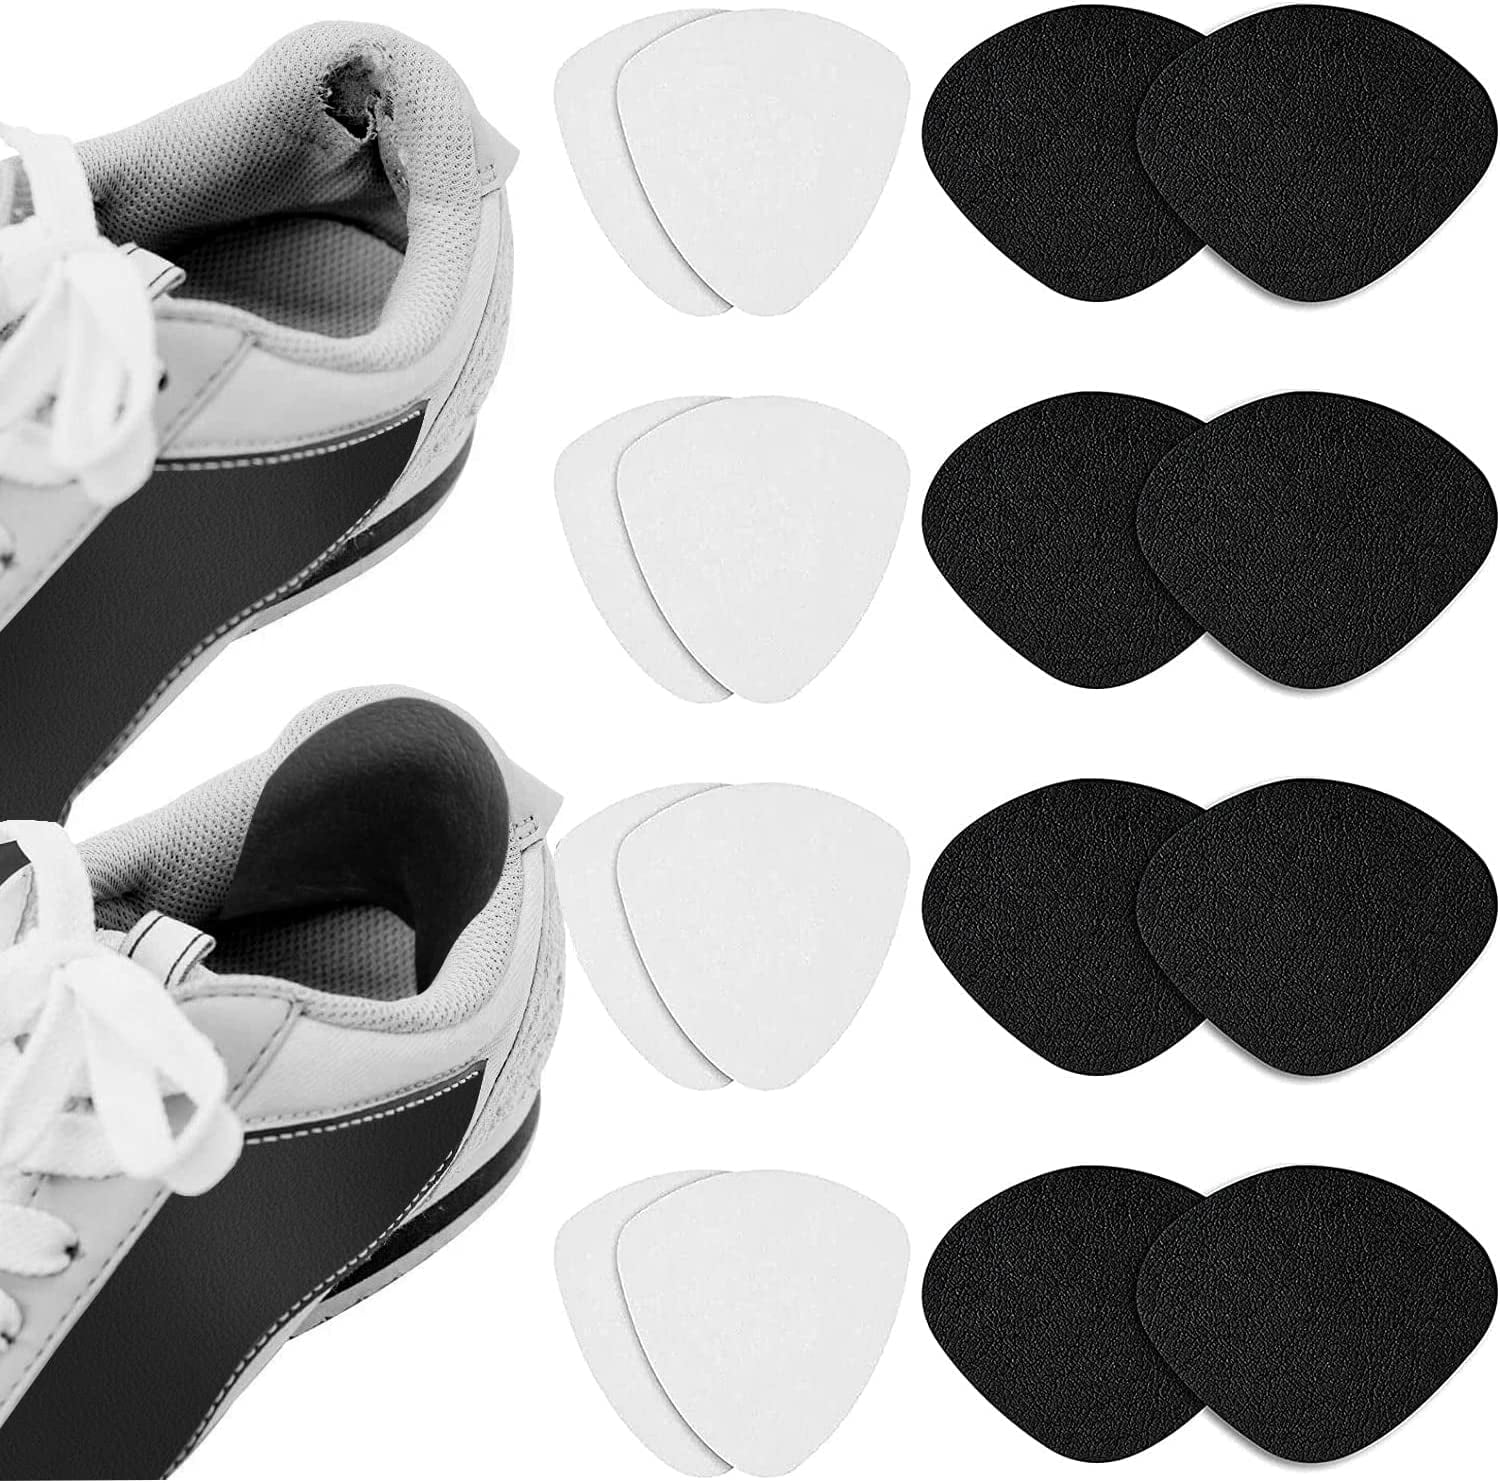 Shoe Heel Repair, 4/6 Pcs Self-Adhesive Inside Shoe Patches for Holes, Shoe  Hole Repair Patch Kit for Sneaker, Leather Shoes, High Heels 